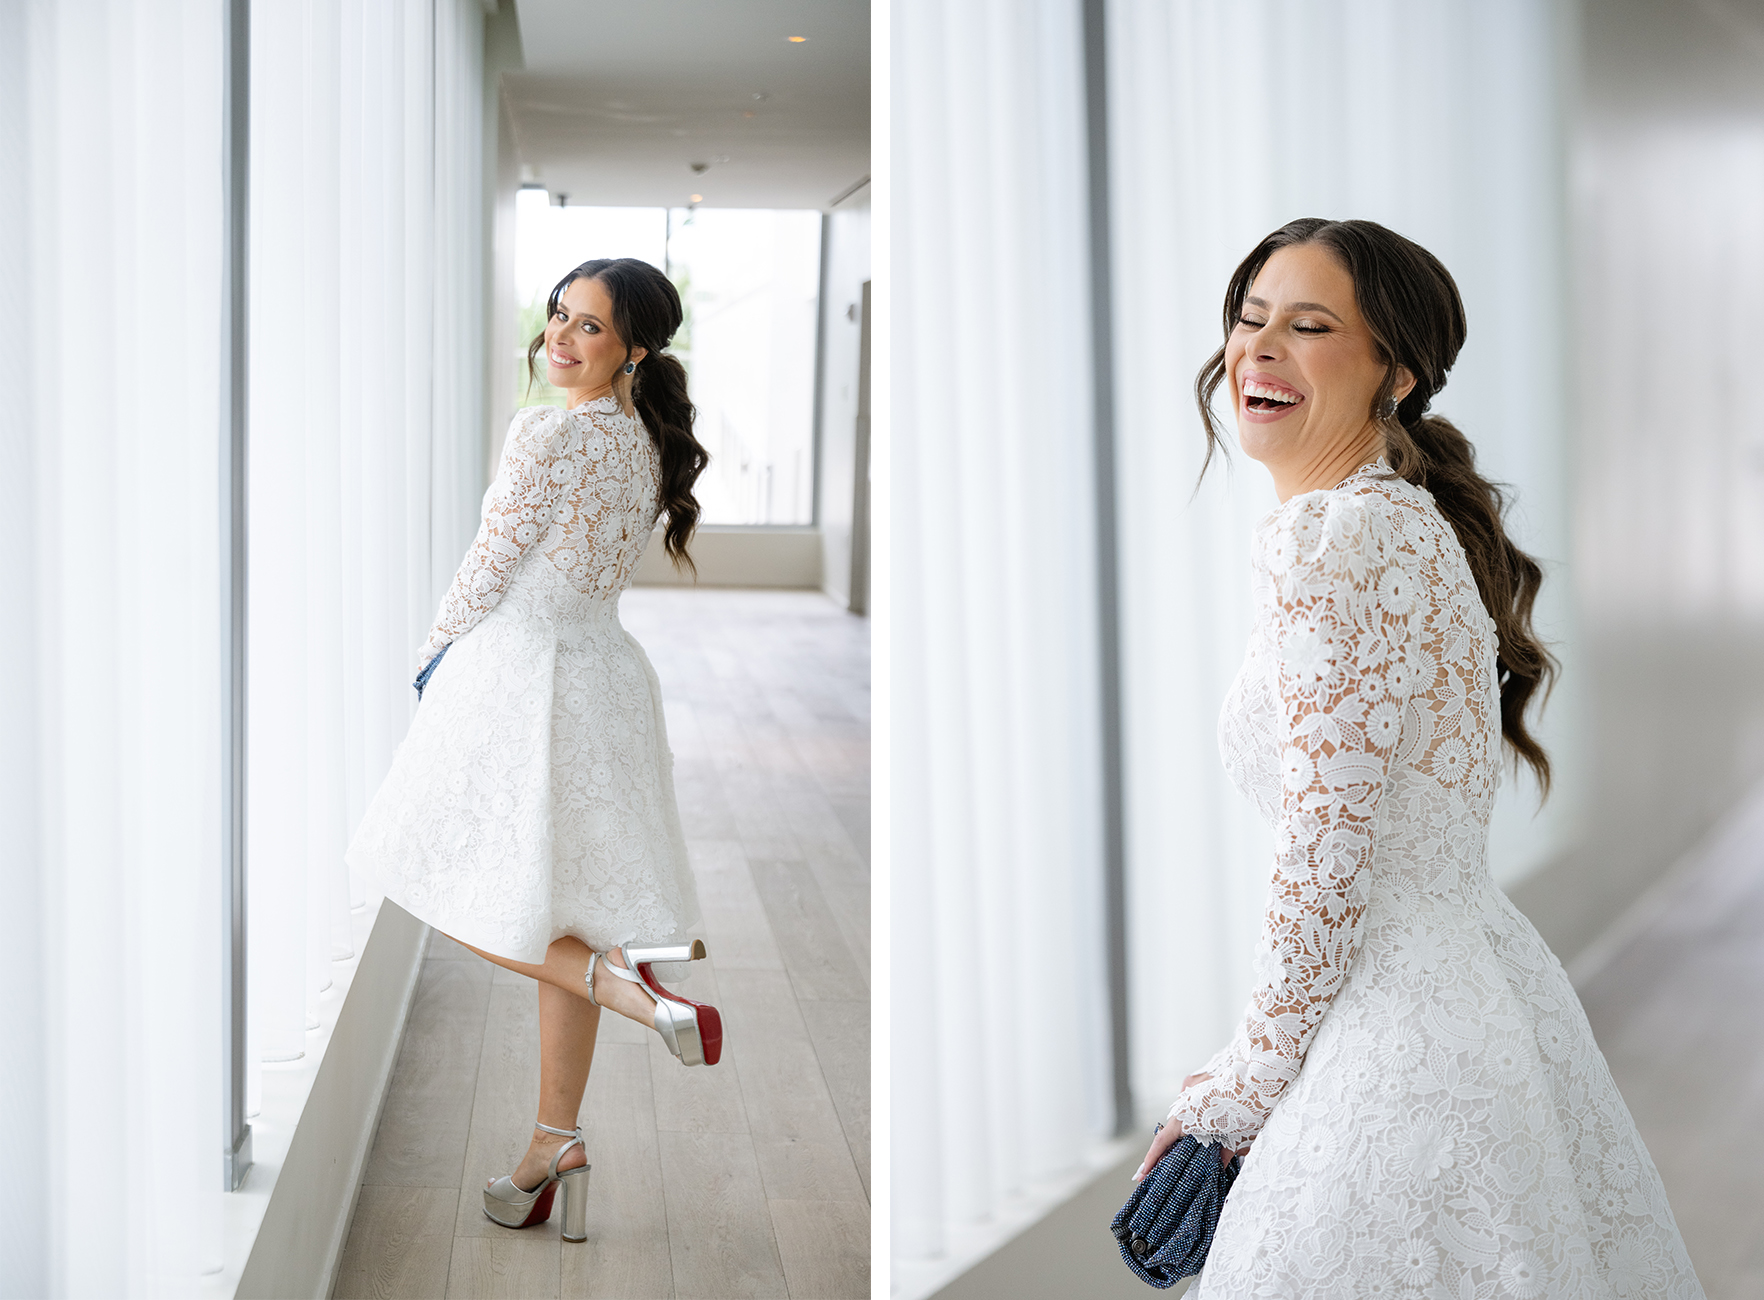 Another stunning bride graces the occasion of their rehearsal dinner in an elegant A-line semi-formal white dress. The dress features exquisite lace details, reaching knee-length for a sophisticated look. <yoastmark class=